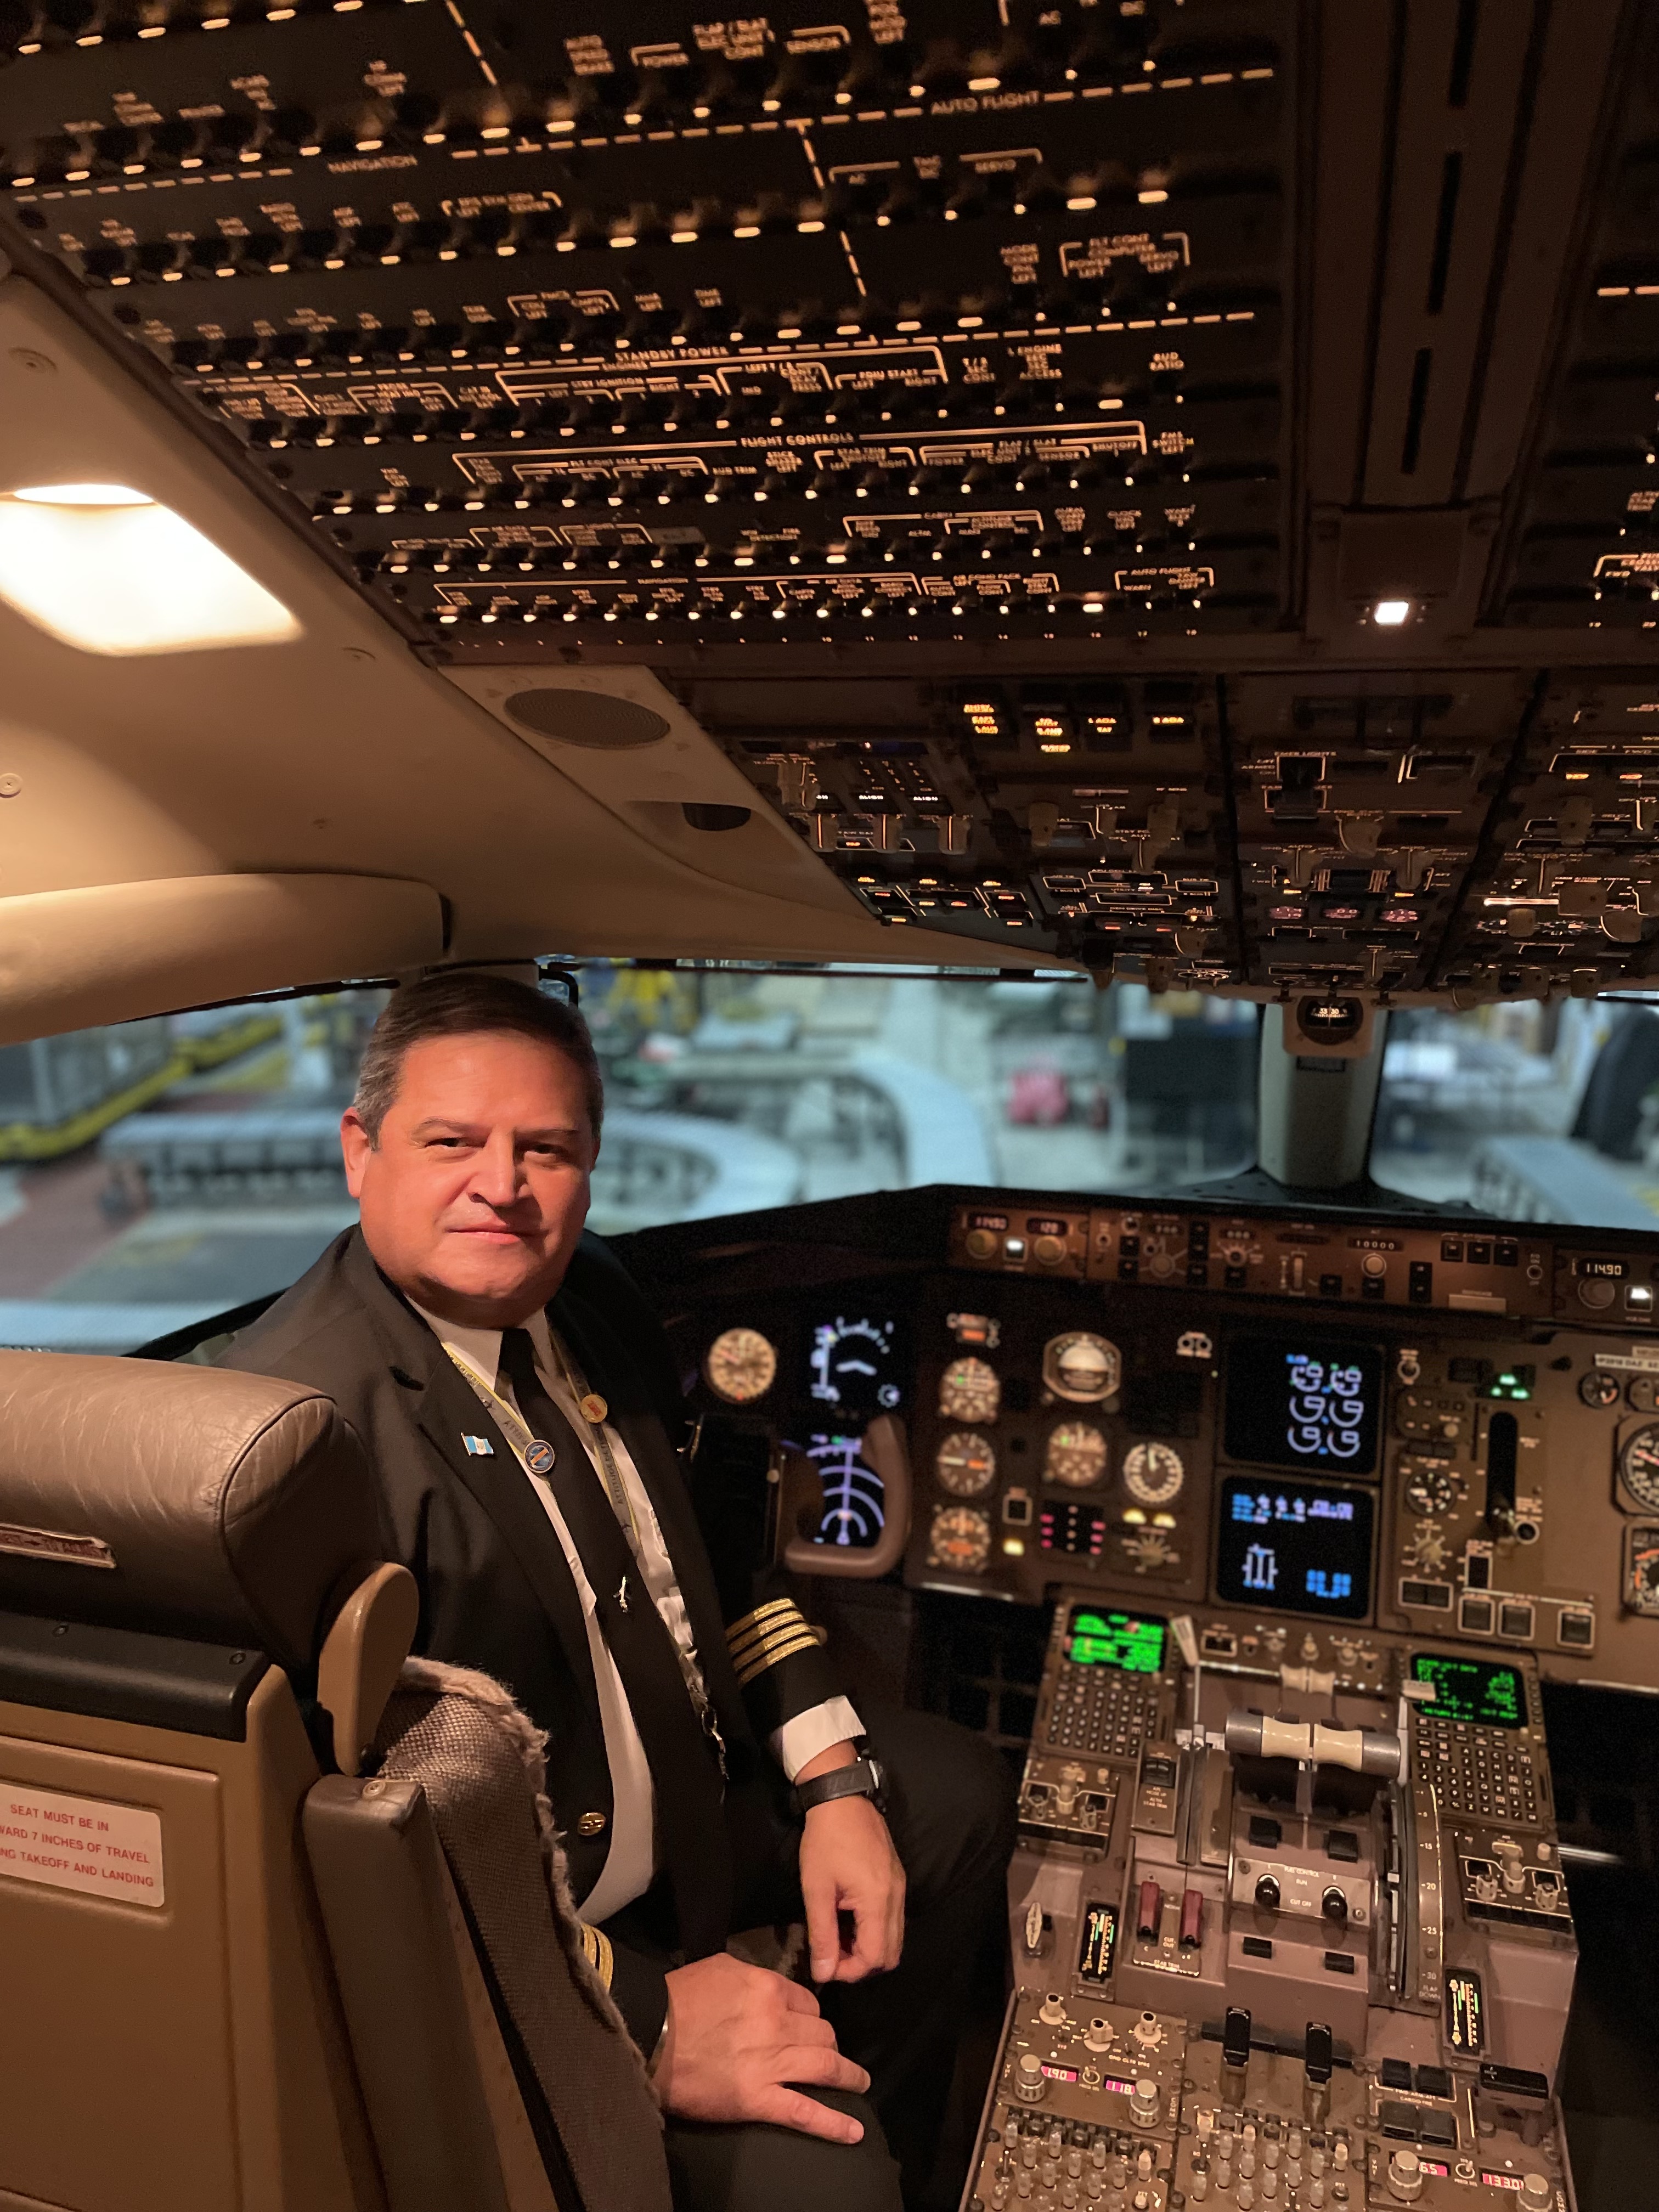 Captain Cesar Caceres – here shown as the Captain on a Boeing 757-200 – has been an aviator pilot with DHL Guatemala for 30 years, and working within the Disaster Response Team (DRT) & Get Airports Ready for Disasters (GARD) team as a volunteer, instructor, and DRT &GARD Lead Coordinator in Guatemala for 12 years. Photo: Deutsche Post DHL Group